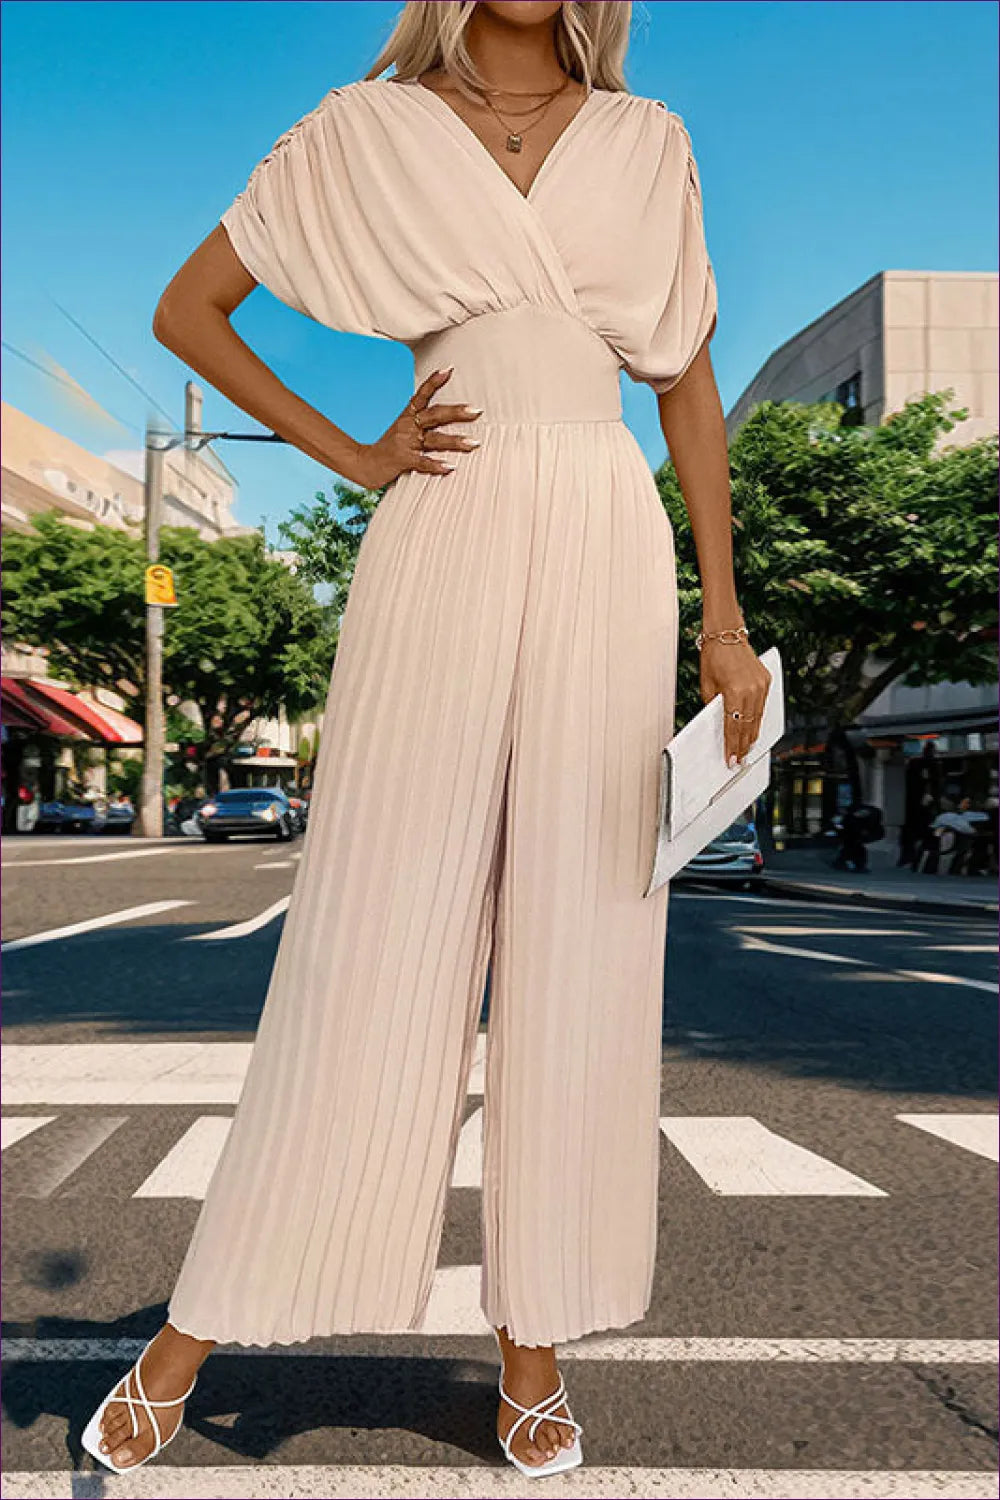 Pleated Summer Jumpsuit - Youthful And Elegant For x